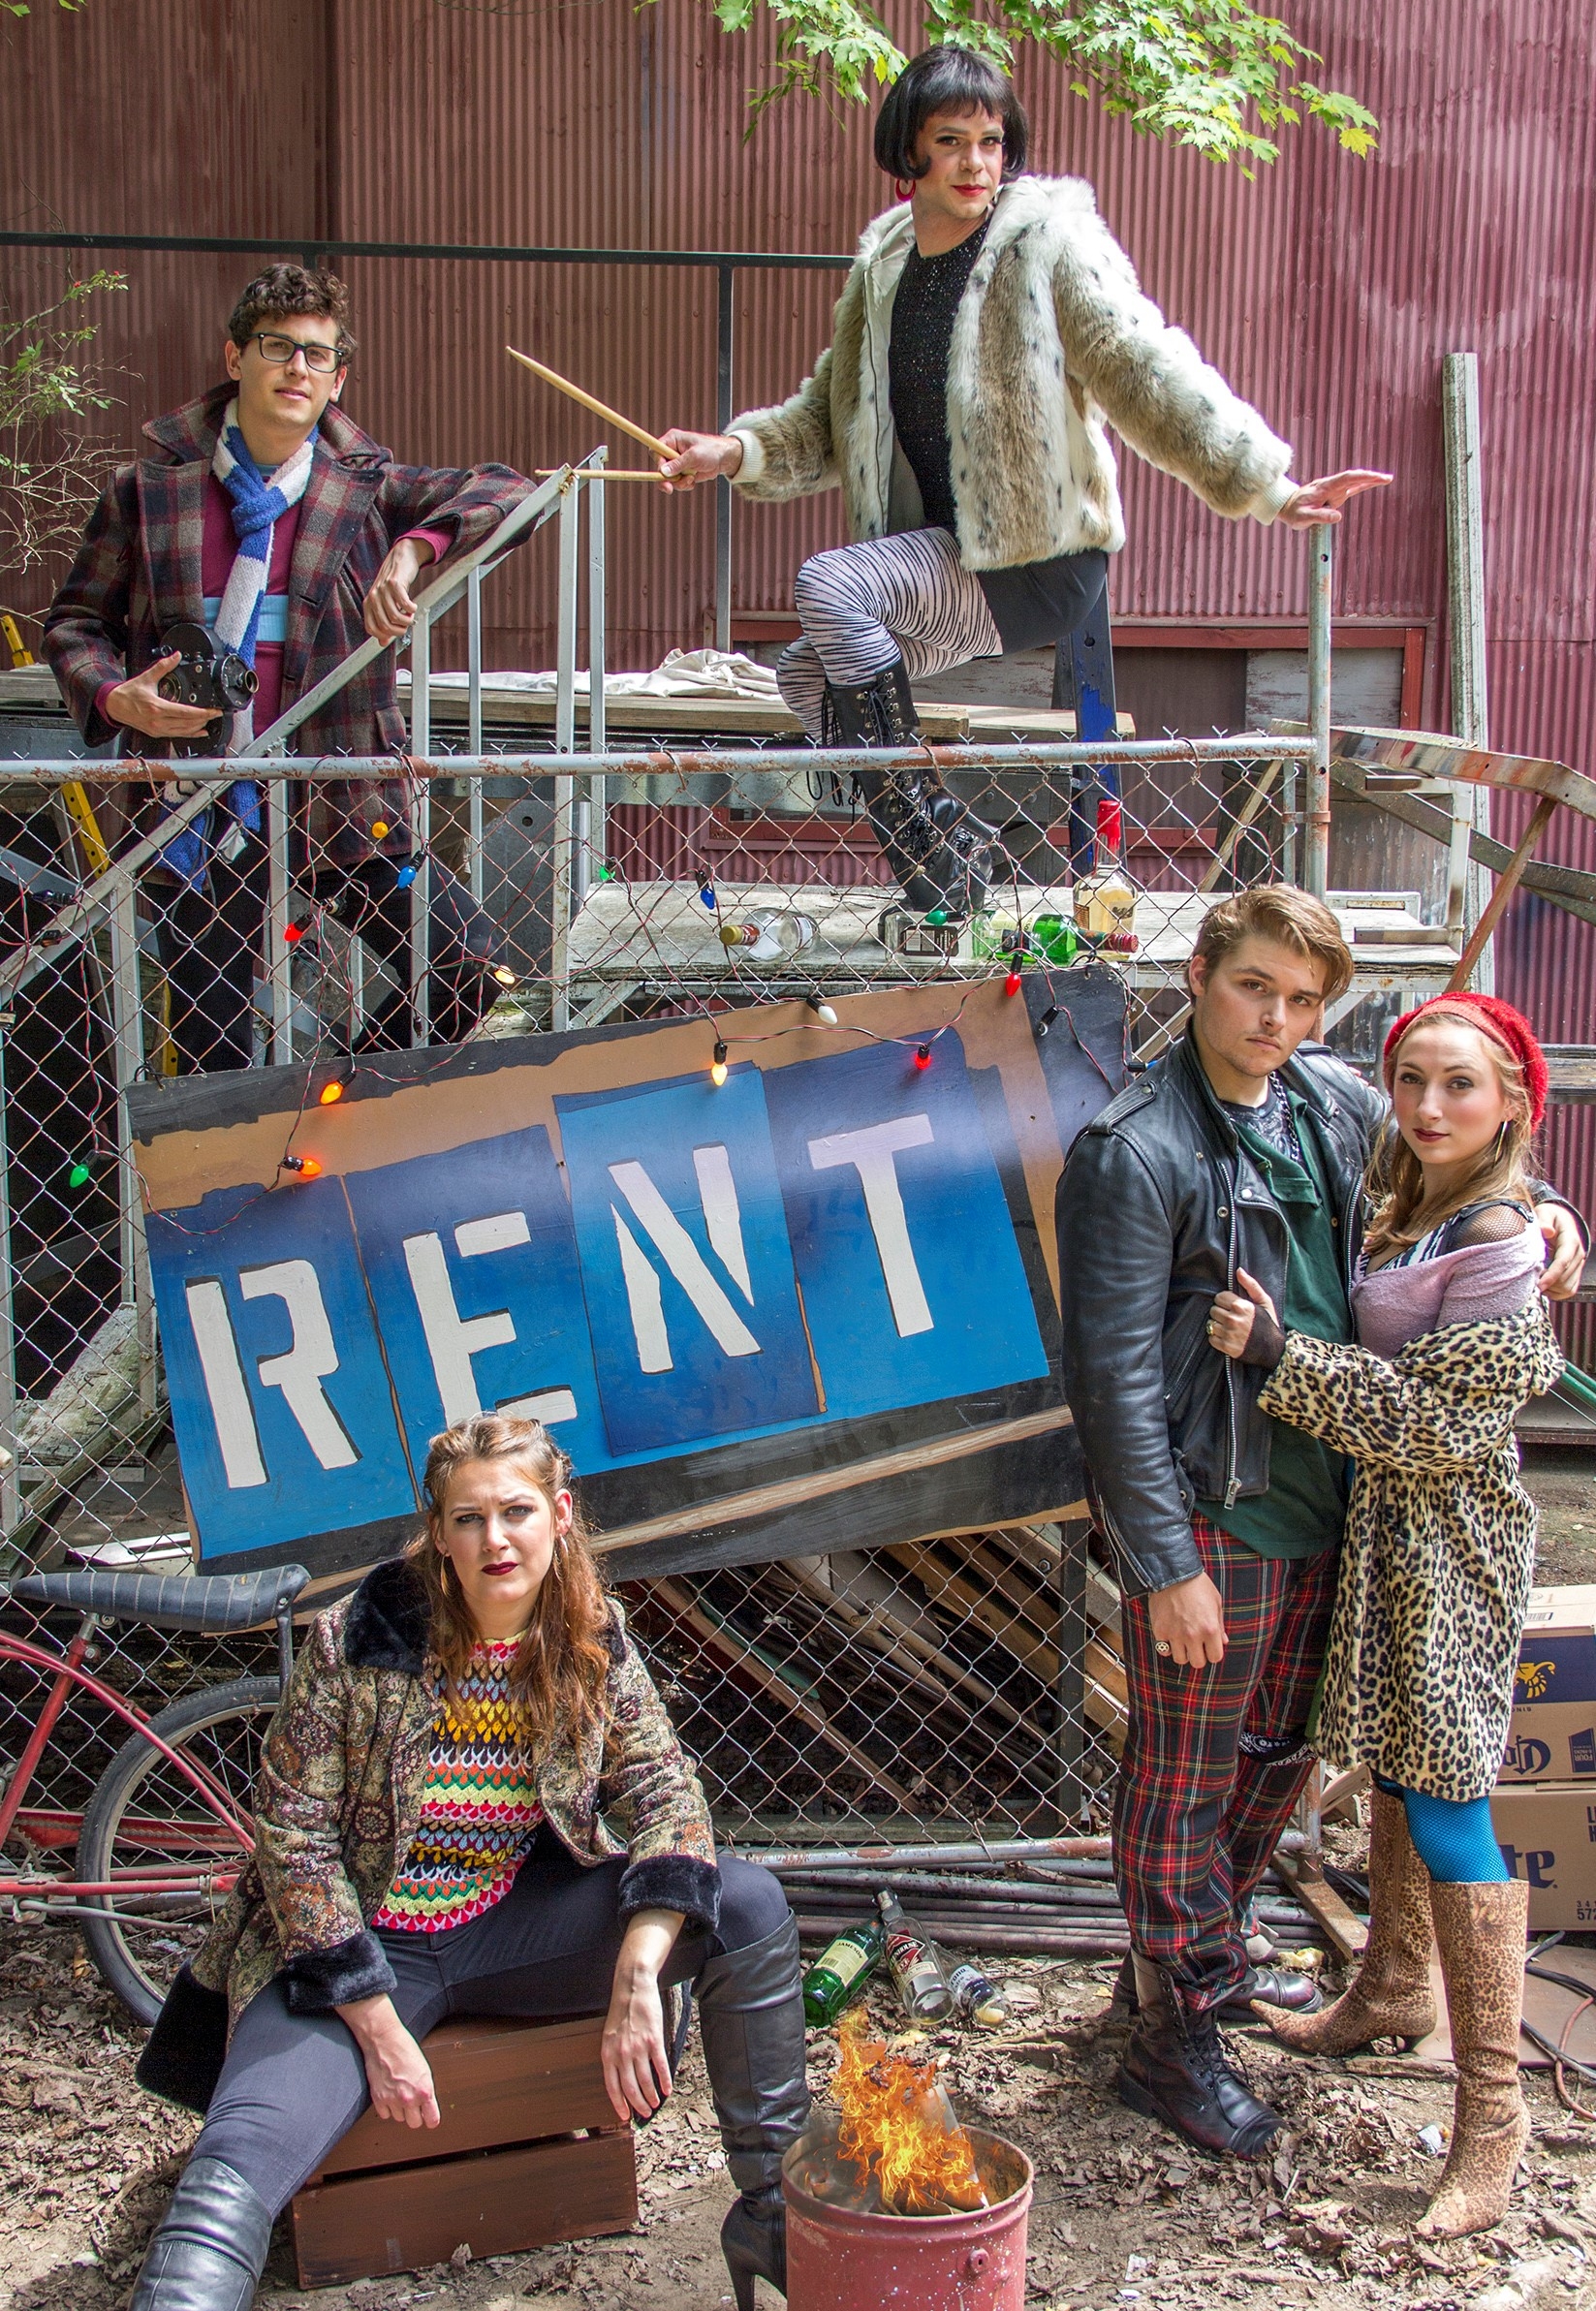 Review: ‘Rent’ offers Barn Theatre’s greatest performances this season